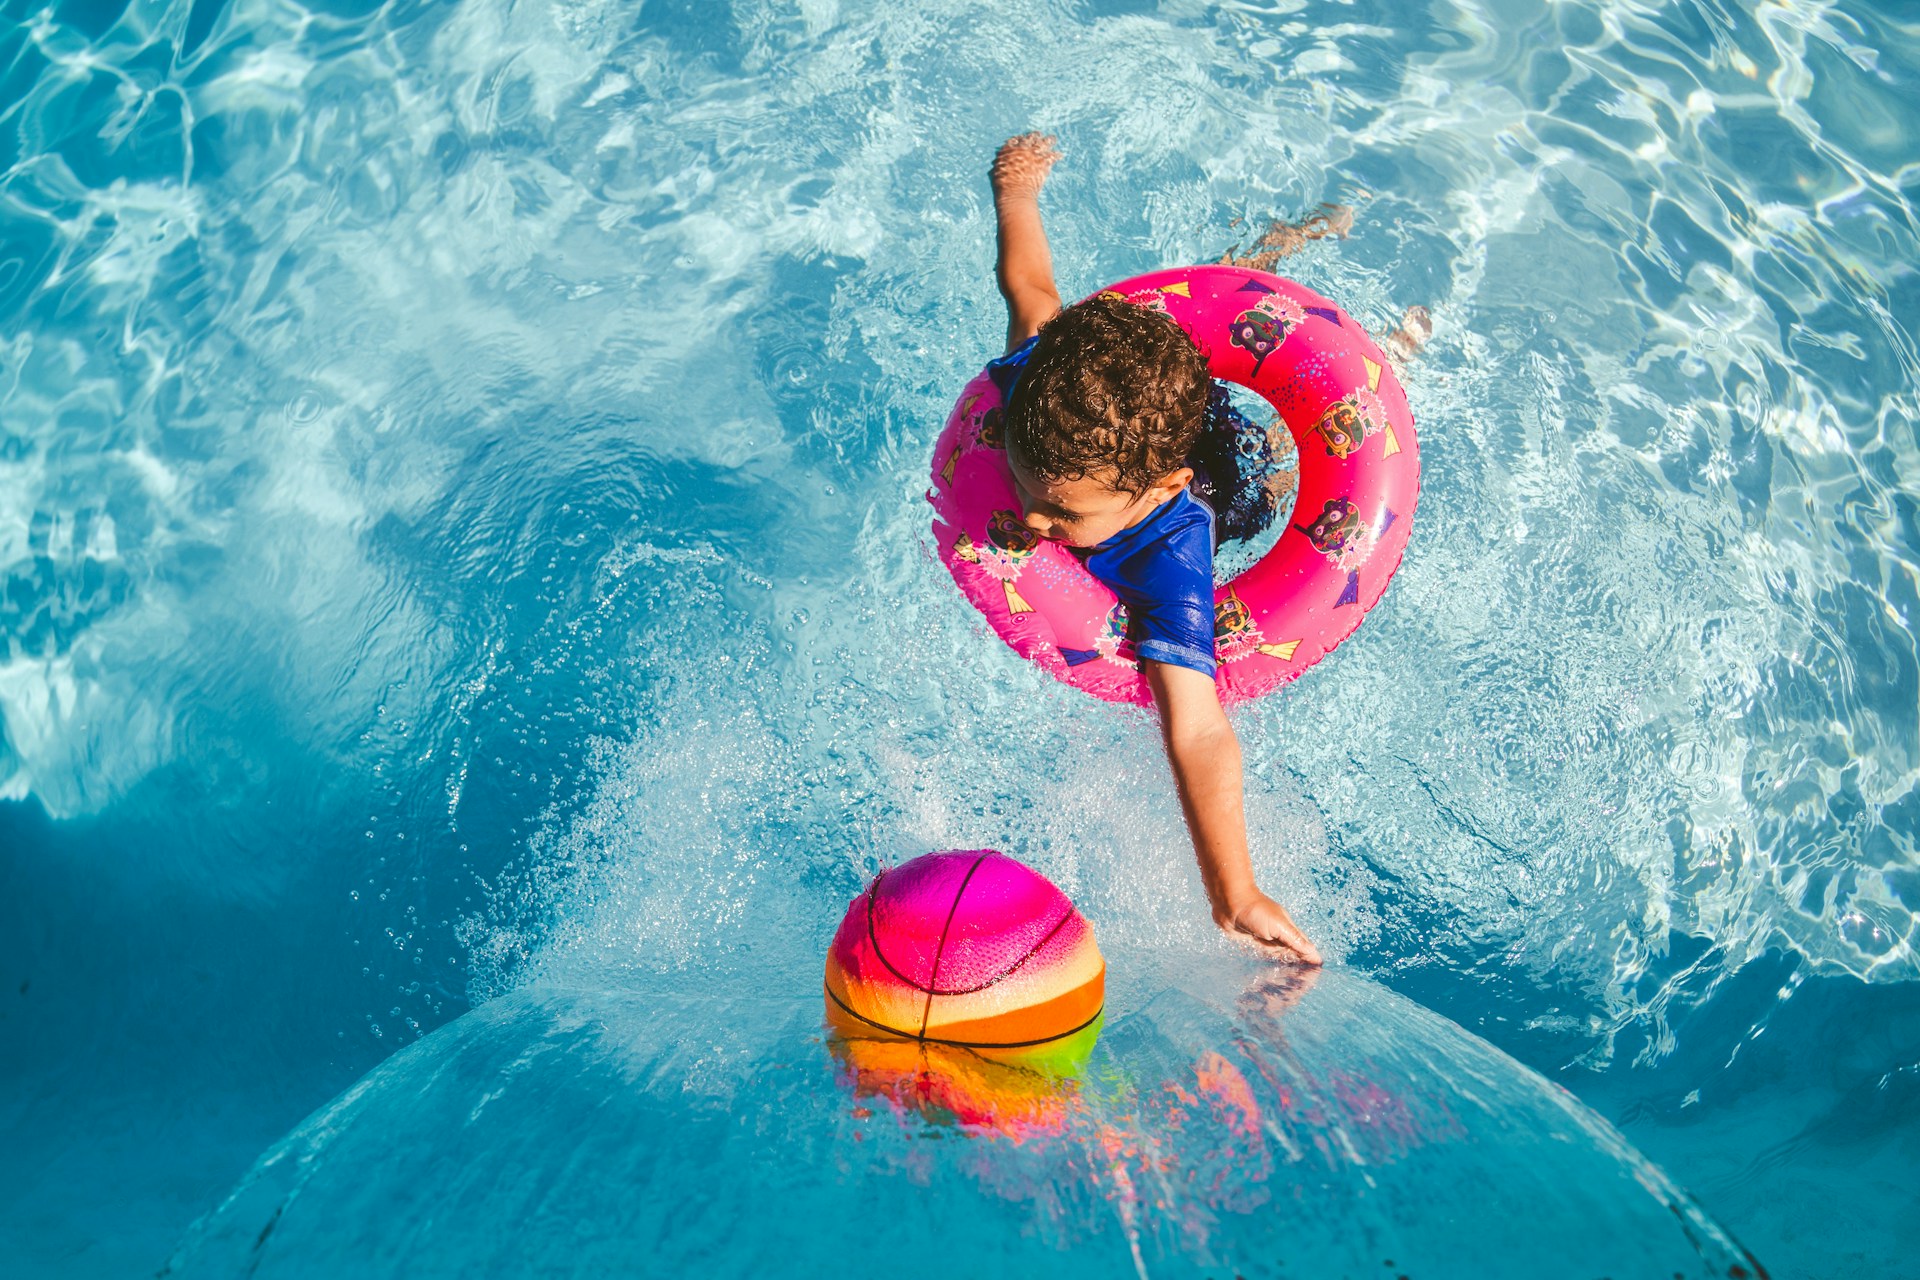 Summer might be hot, so take advantage of this opportunity to engage in fun water activities! Whether it's a simple water balloon fight on the lawn, taking an exciting trip to a water park, or going to the local swimming pool, these refreshing activities are a fun way to bond and cool down under the summer sun.